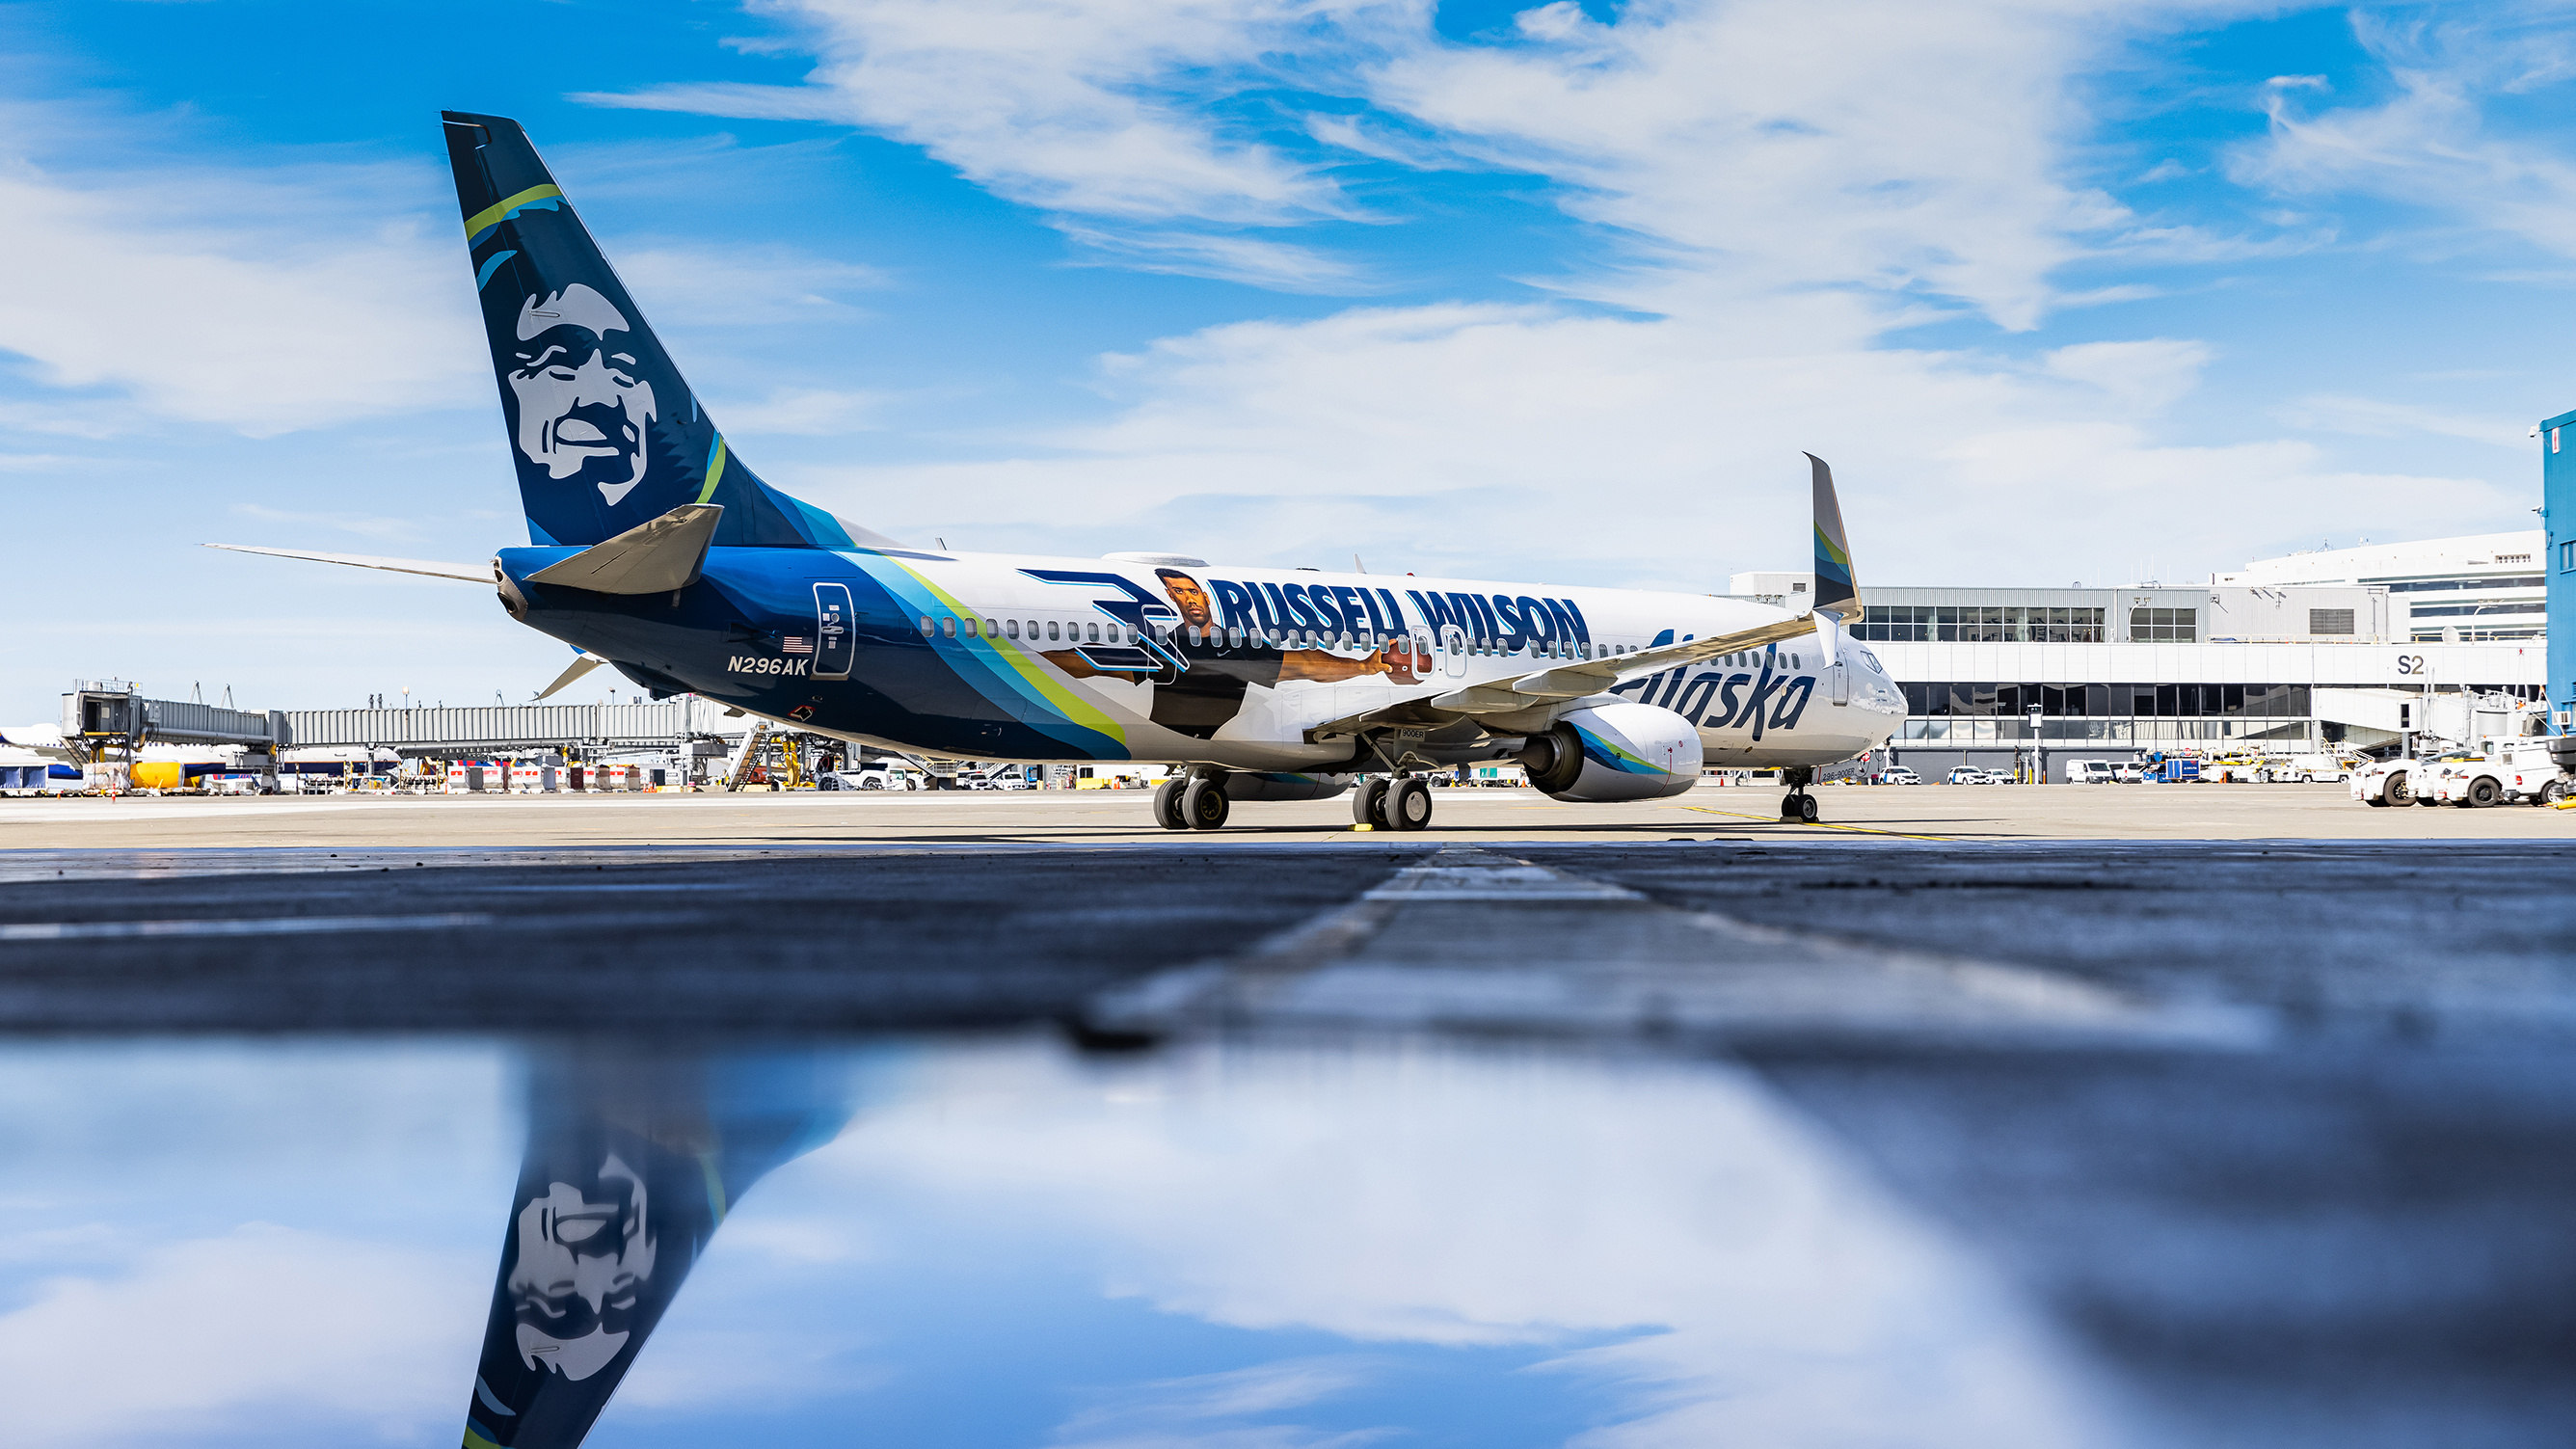 Alaska Airlines, 2021 Russell Wilson logo jet, Special edition, Unique livery, 2680x1510 HD Desktop